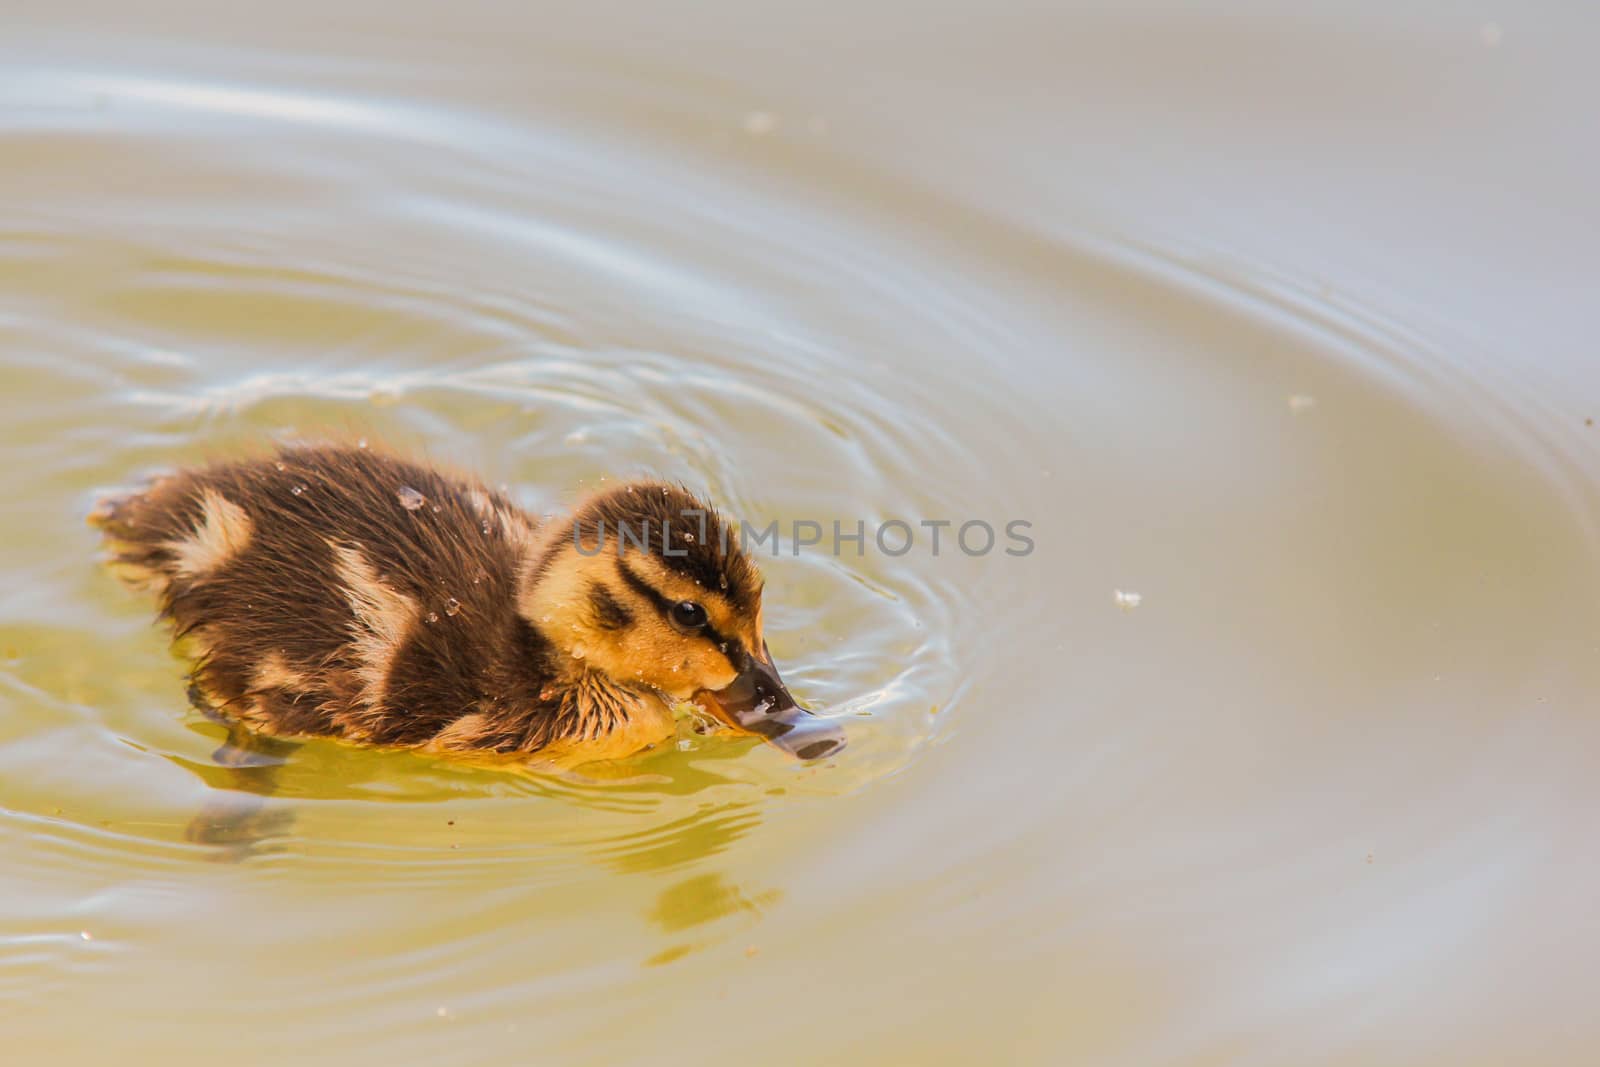 A yellow duckling swimming around by itself in blue water